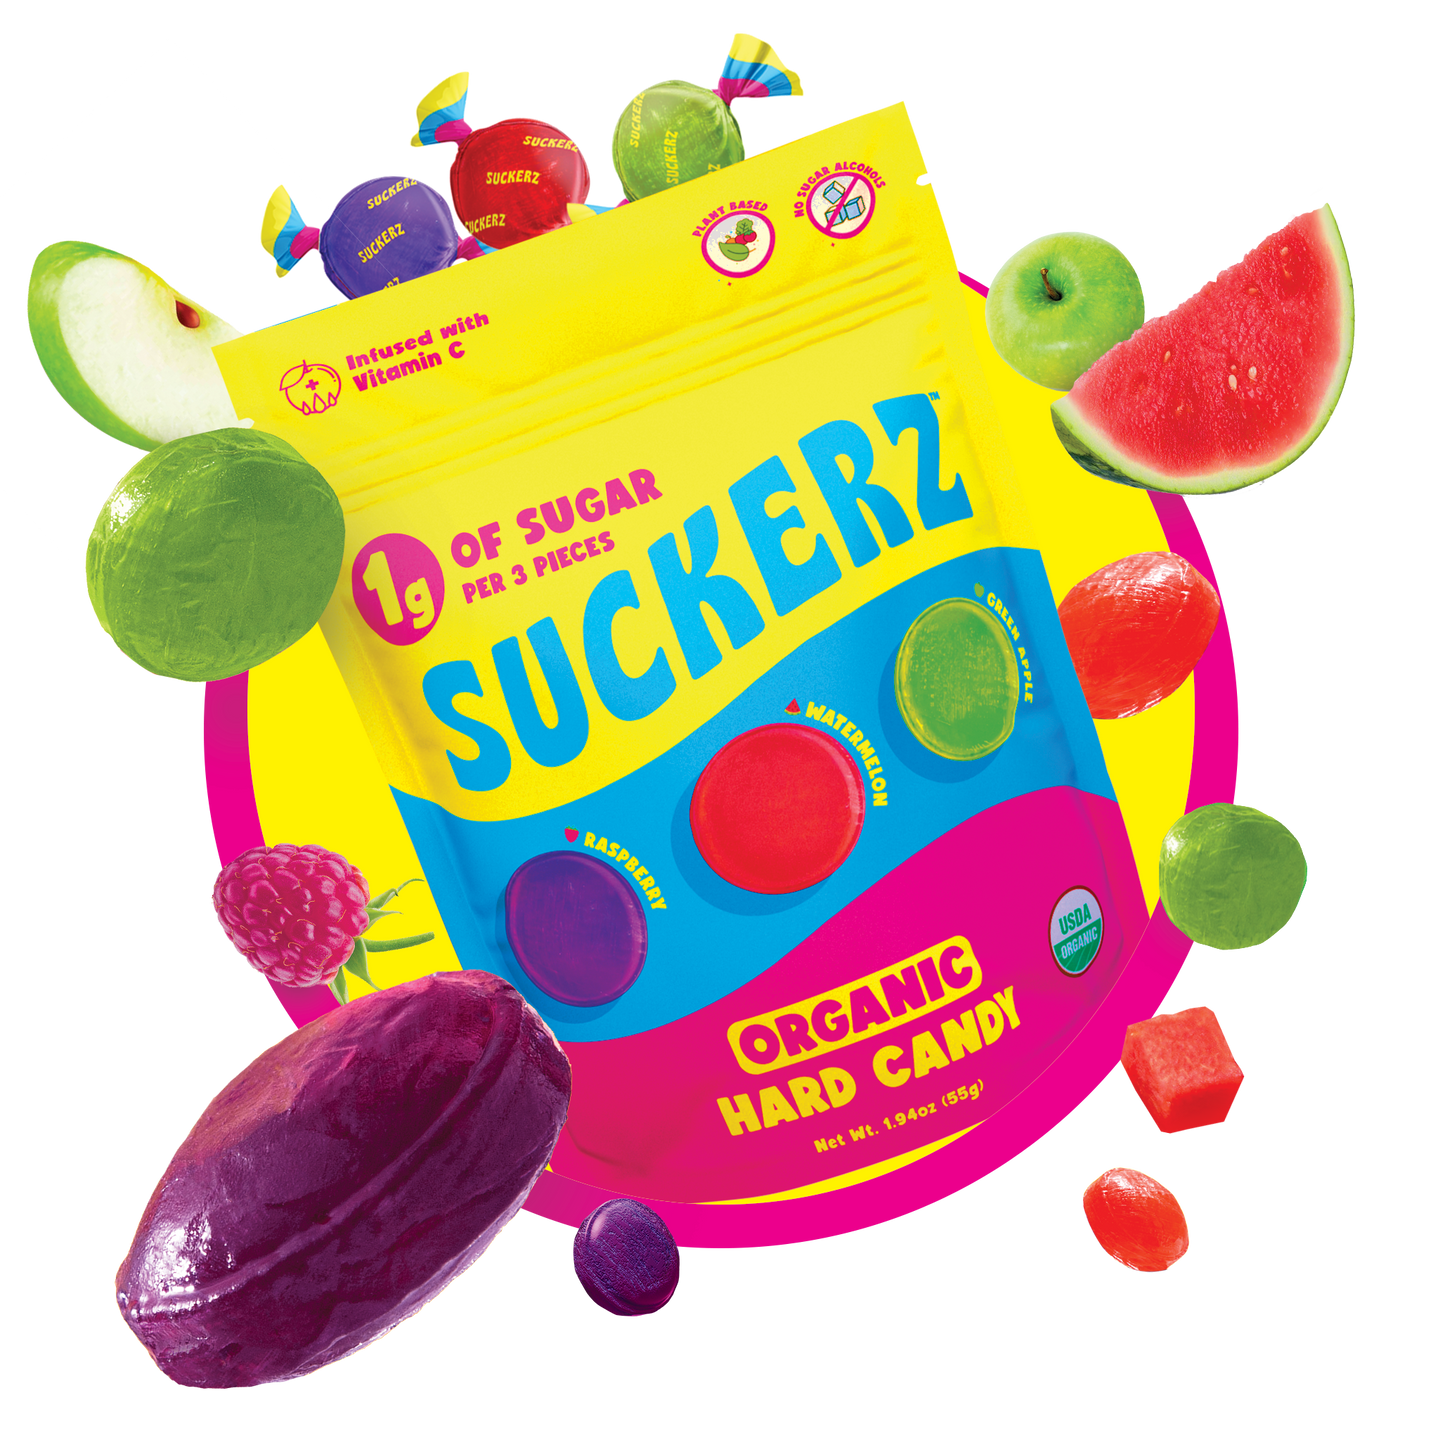 Original Hard Candy, Certified Organic, Vitamin C Infused, No Artificial Sweeteners,  by Suckerz